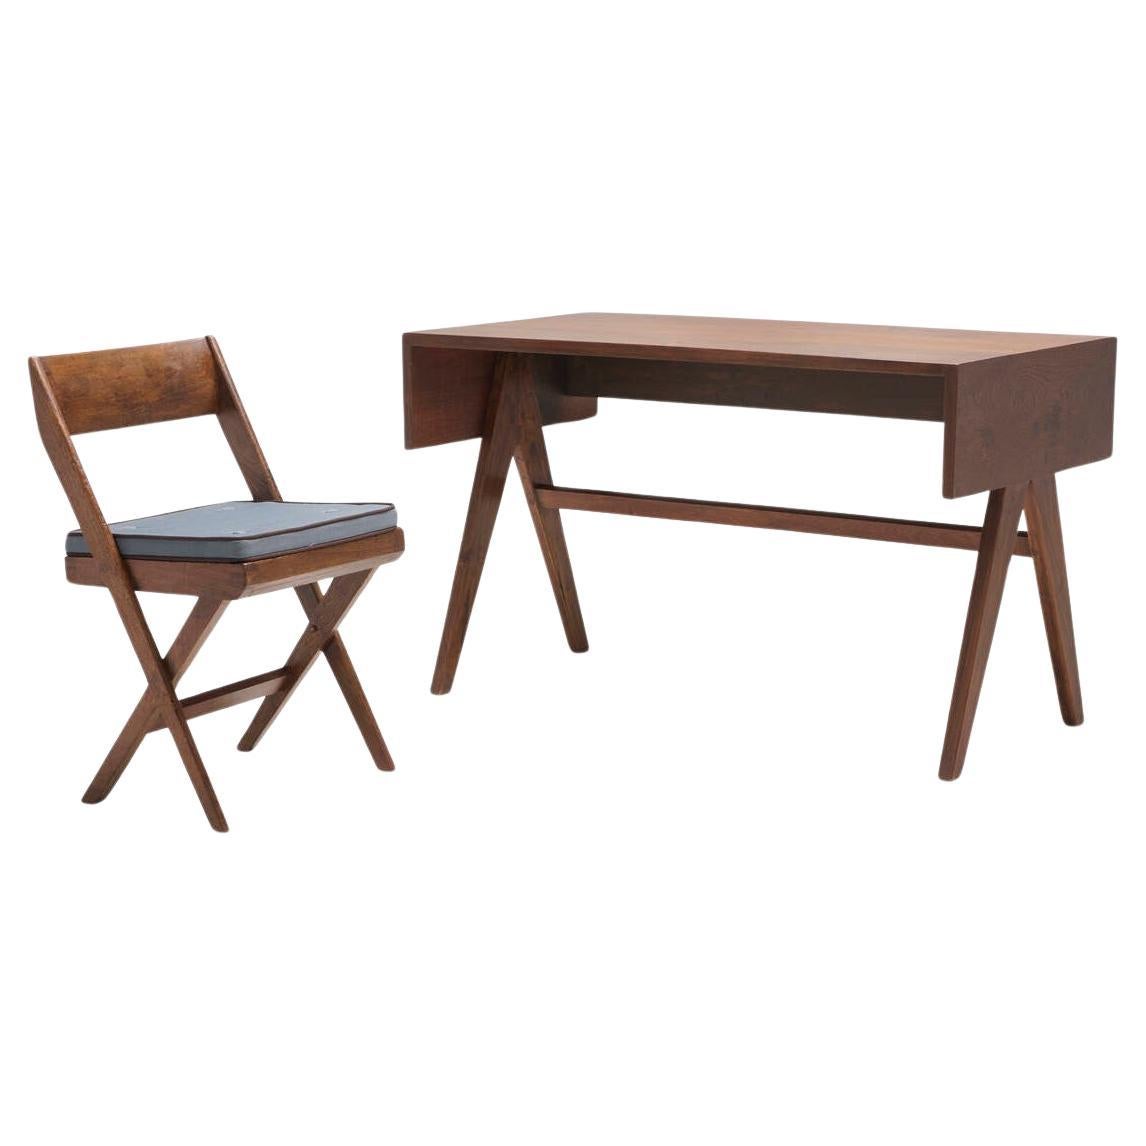 Beautiful set of Pierre Jeanneret desk and chair. The simplicity of the design, yet robust and functional has inspired many versions all over the world, but these original pieces still maintain their unmatched character and patina that distinguishes